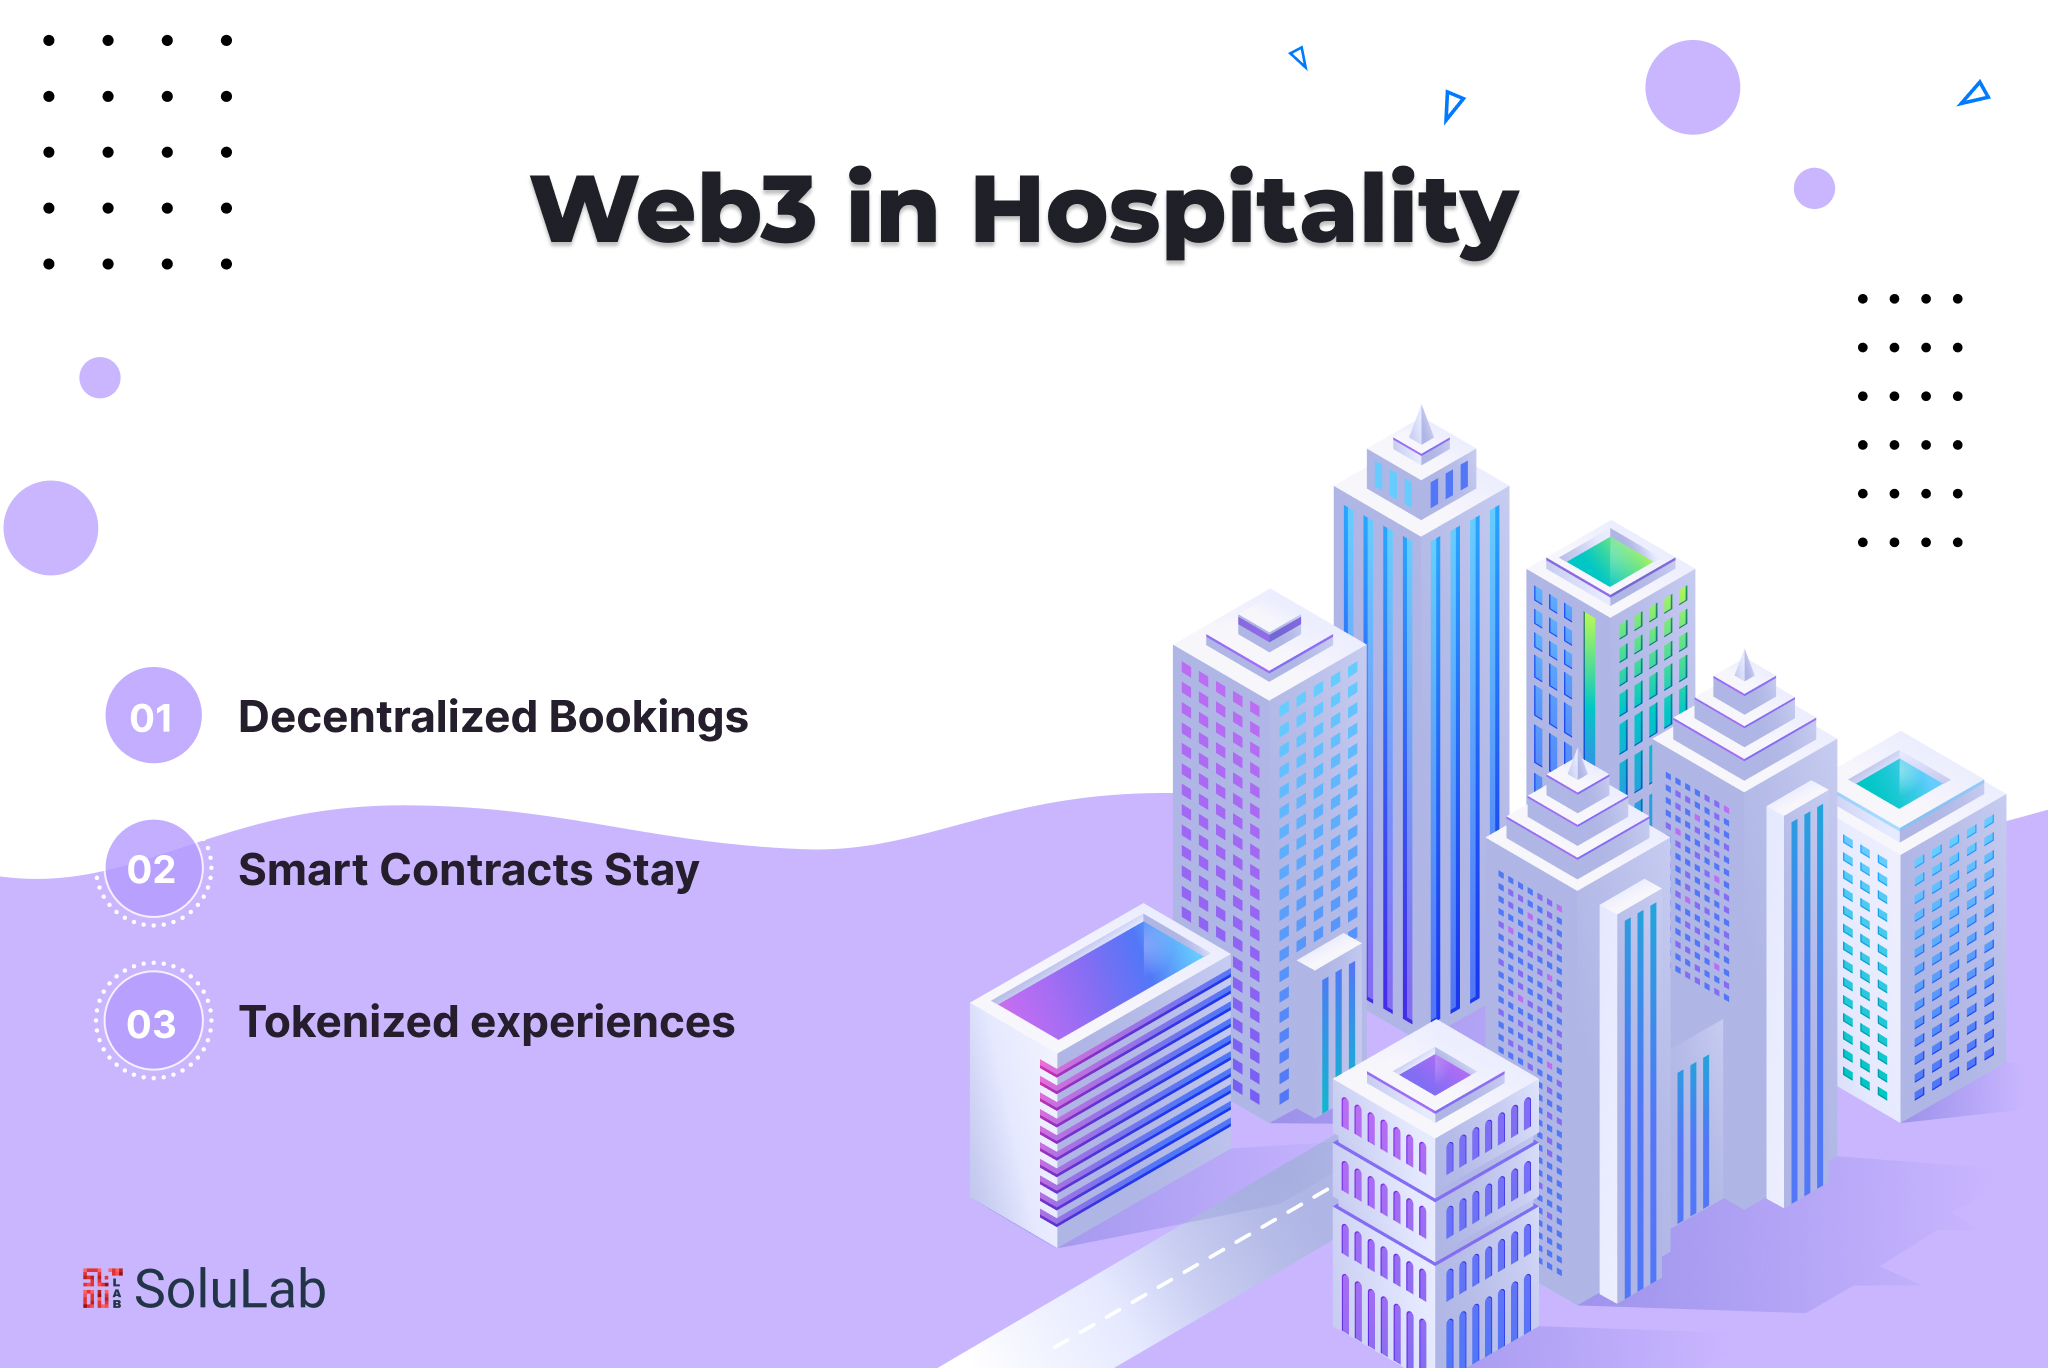 Web3 in Hospitality